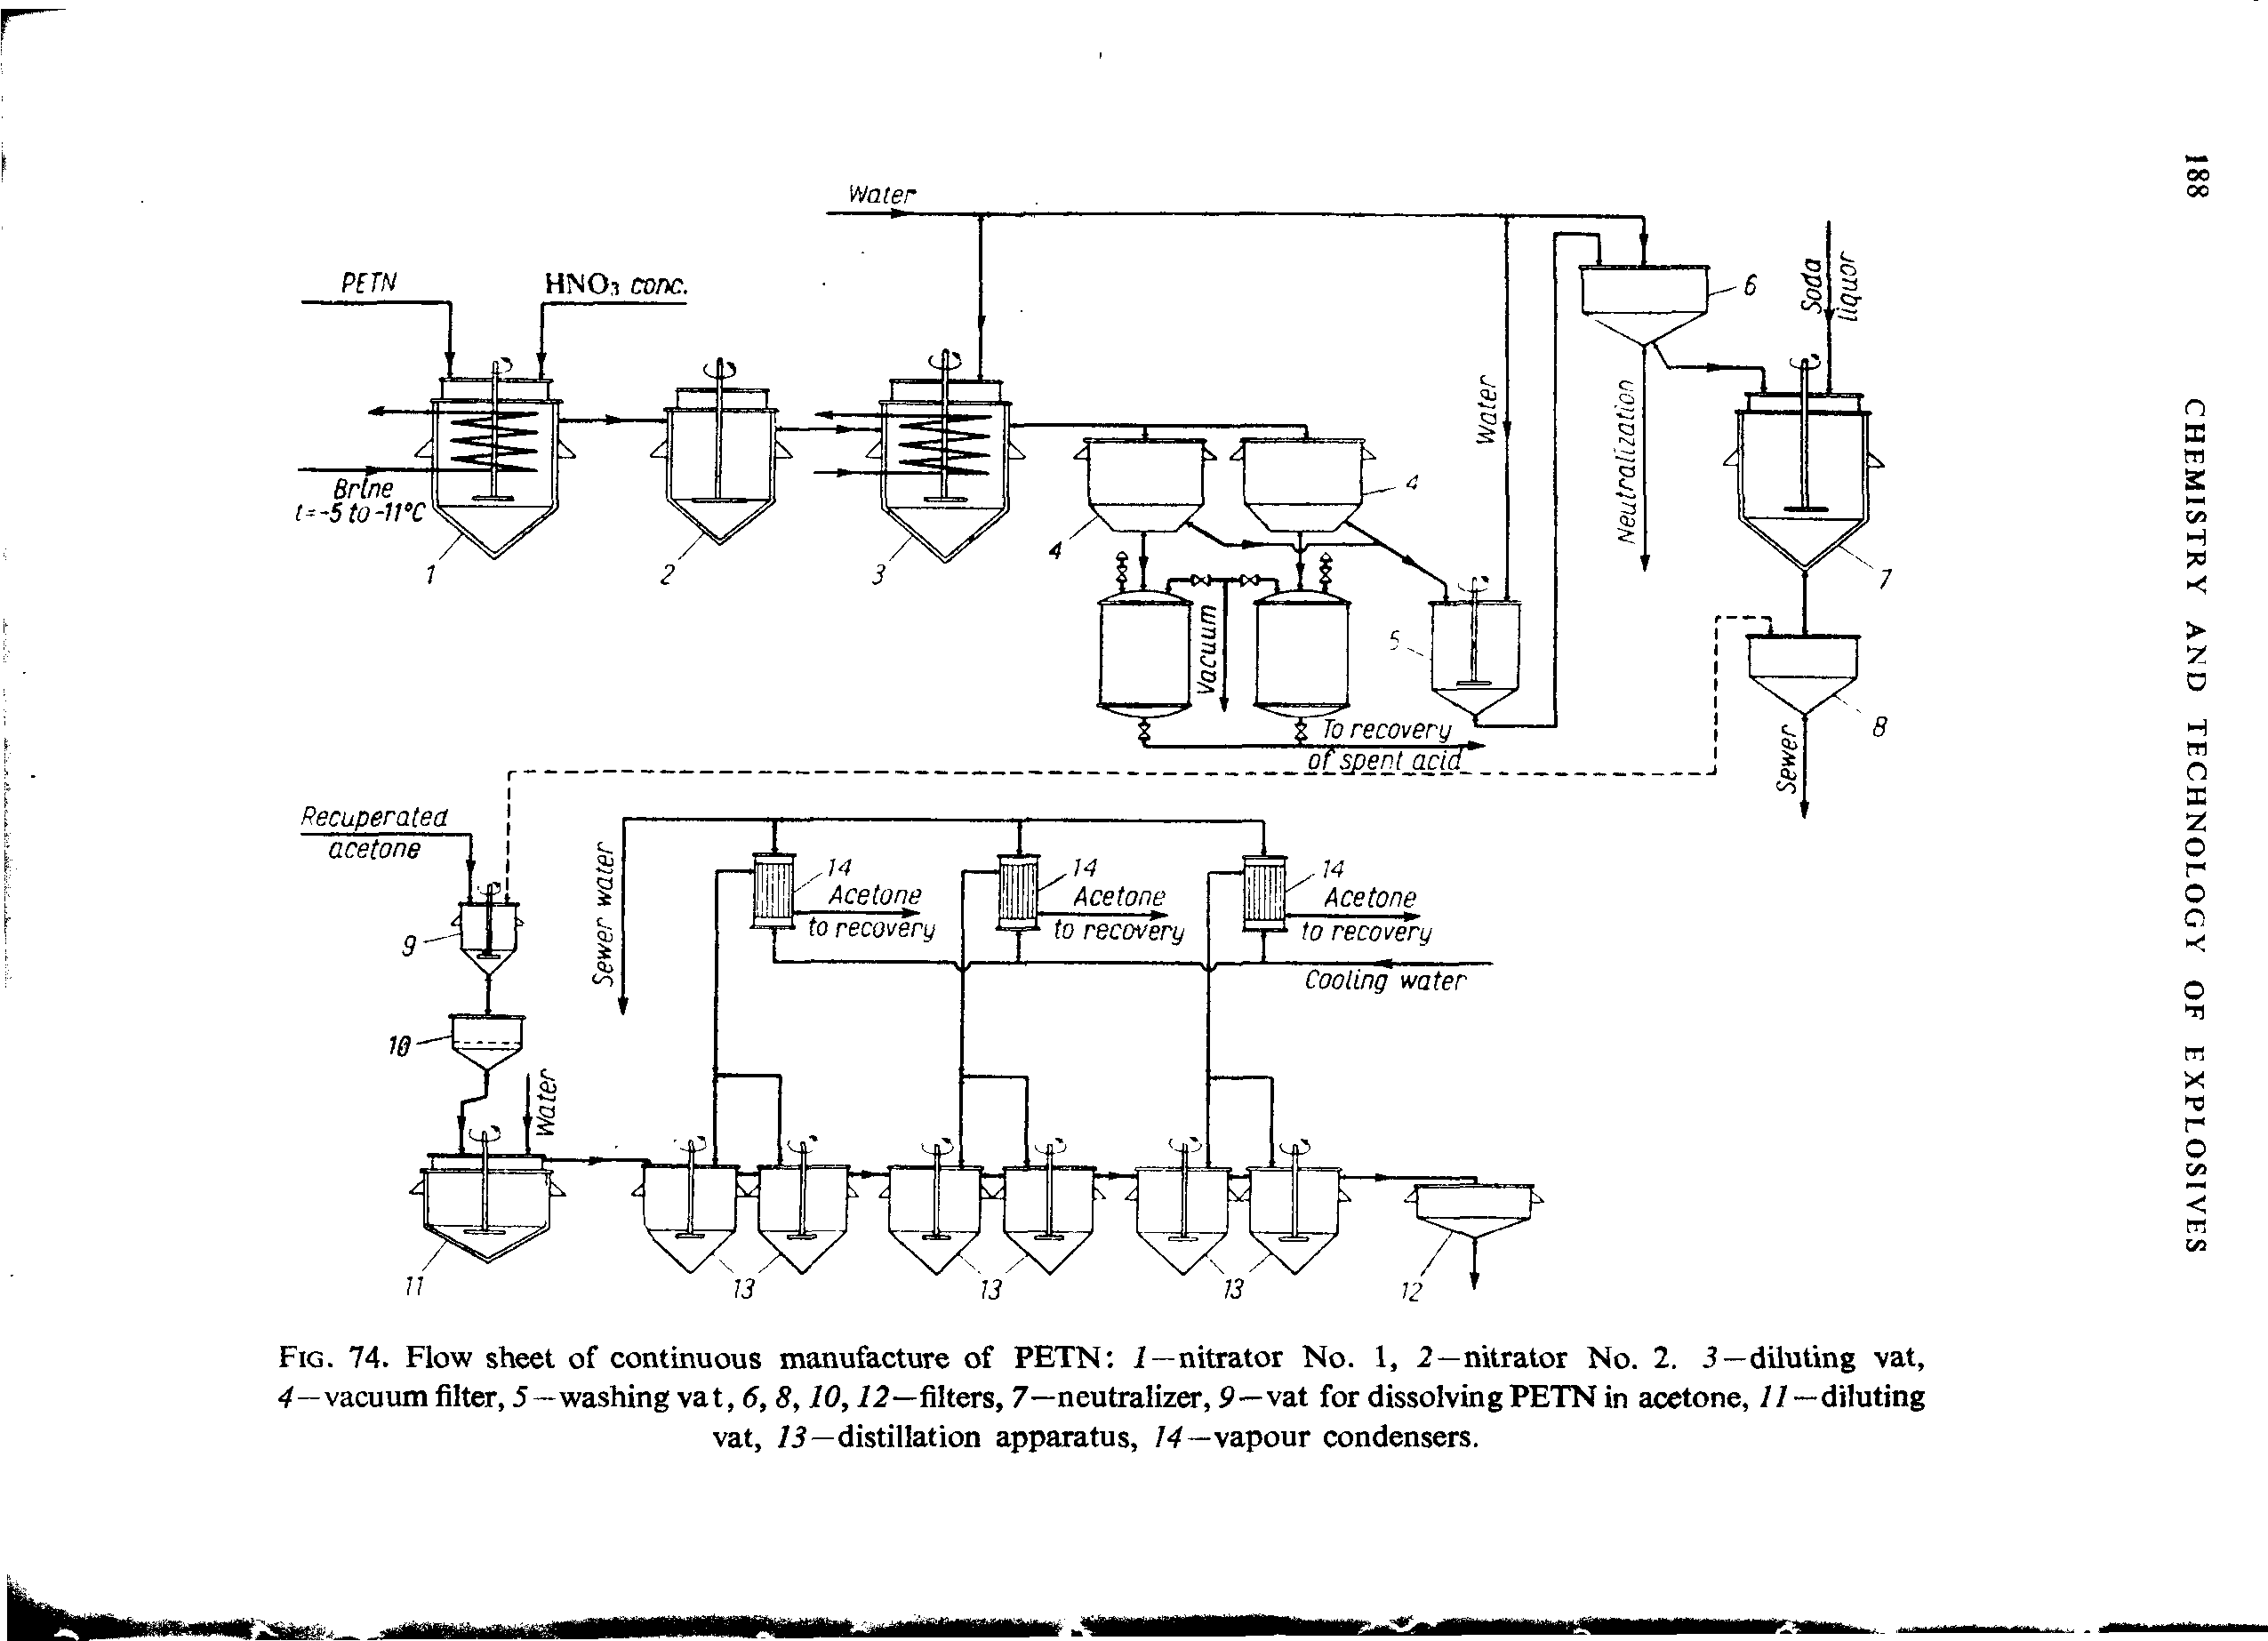 Fig. 74. Flow sheet of continuous manufacture of PETN i—nitrator No. 1, 2—nitrator No. 2. 3 — diluting vat, 4—vacuum filter, 5—washing vat, 6, 8,10,12—filters, 7—neutralizer, 9—vat for dissolving PETN in acetone, 11 —diluting...